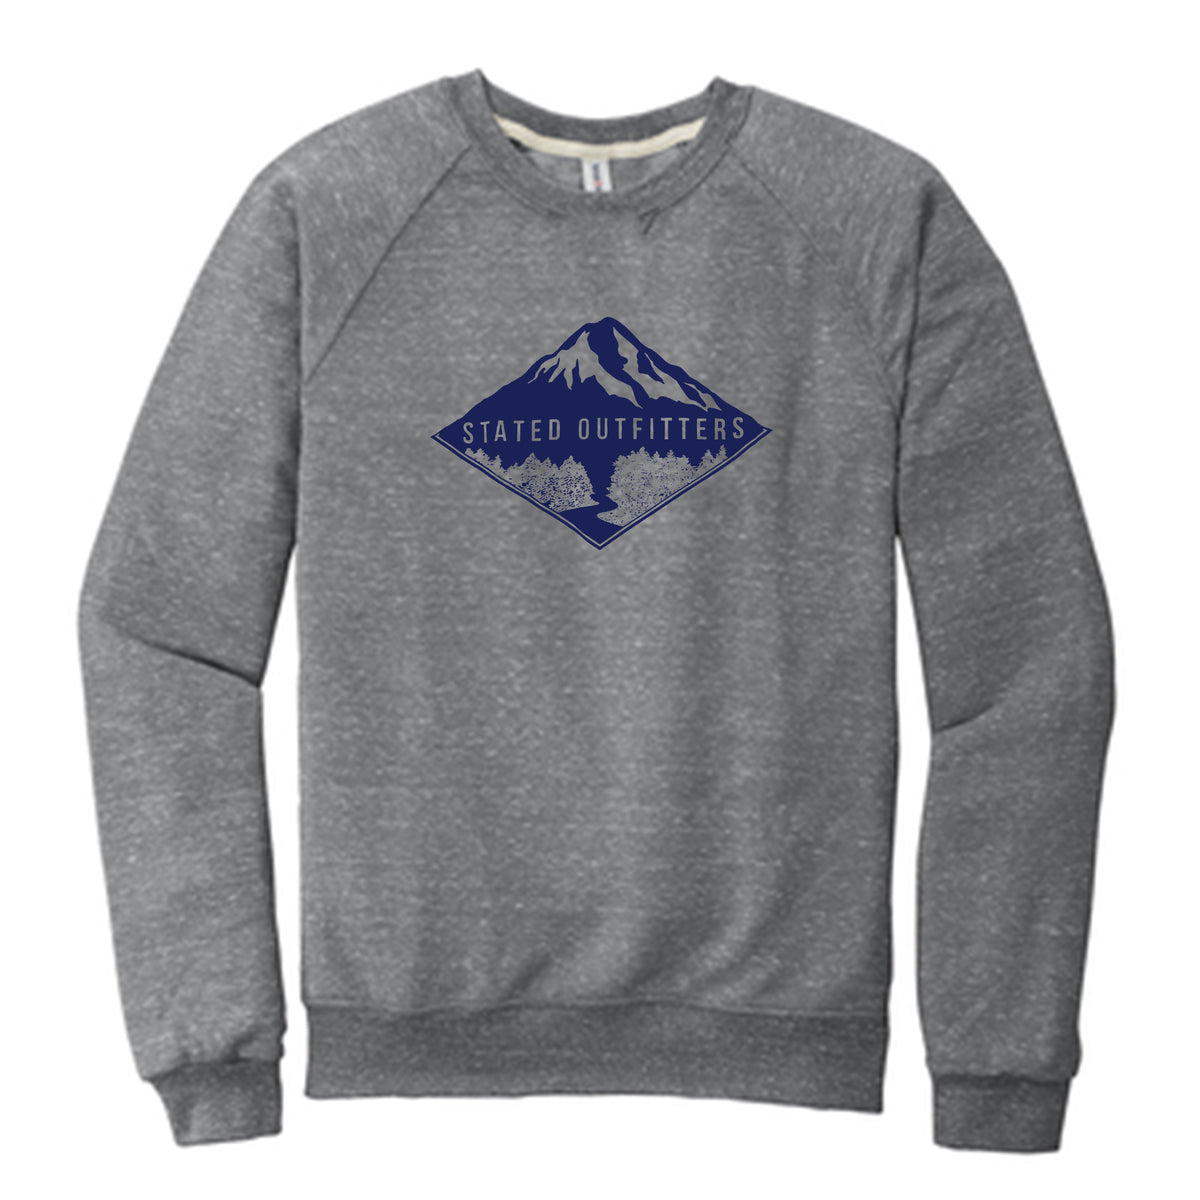 Stated Outfitters Mountain Sweatshirt